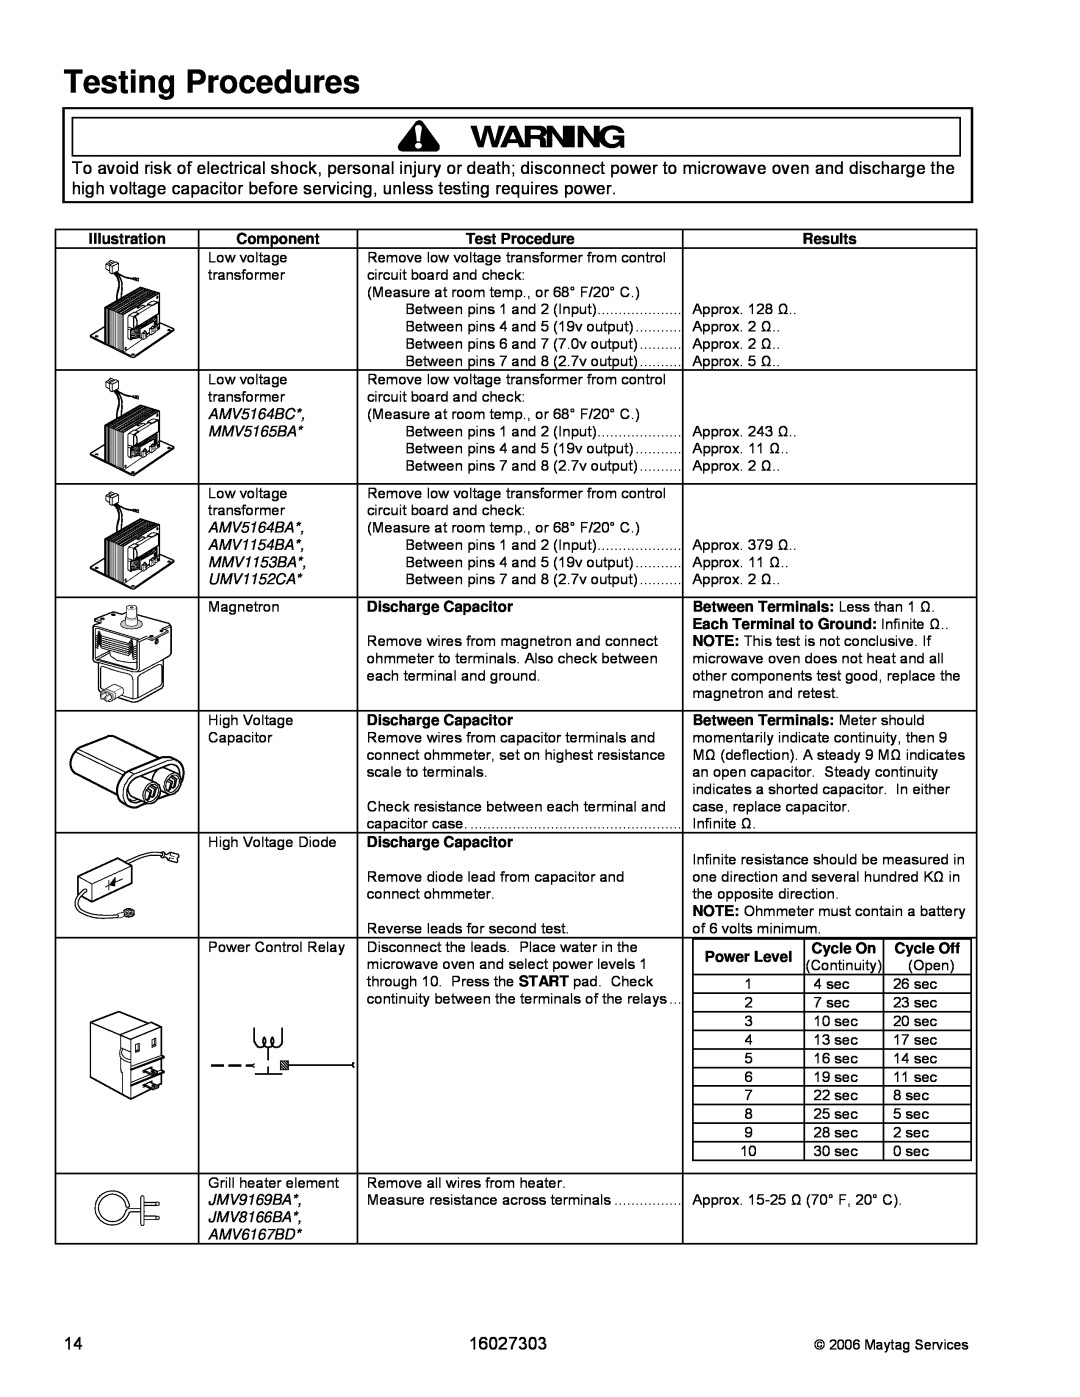 Maytag UMV1152CA manual Testing Procedures, 16027303, Illustration, Component, Test Procedure, Results, Discharge Capacitor 